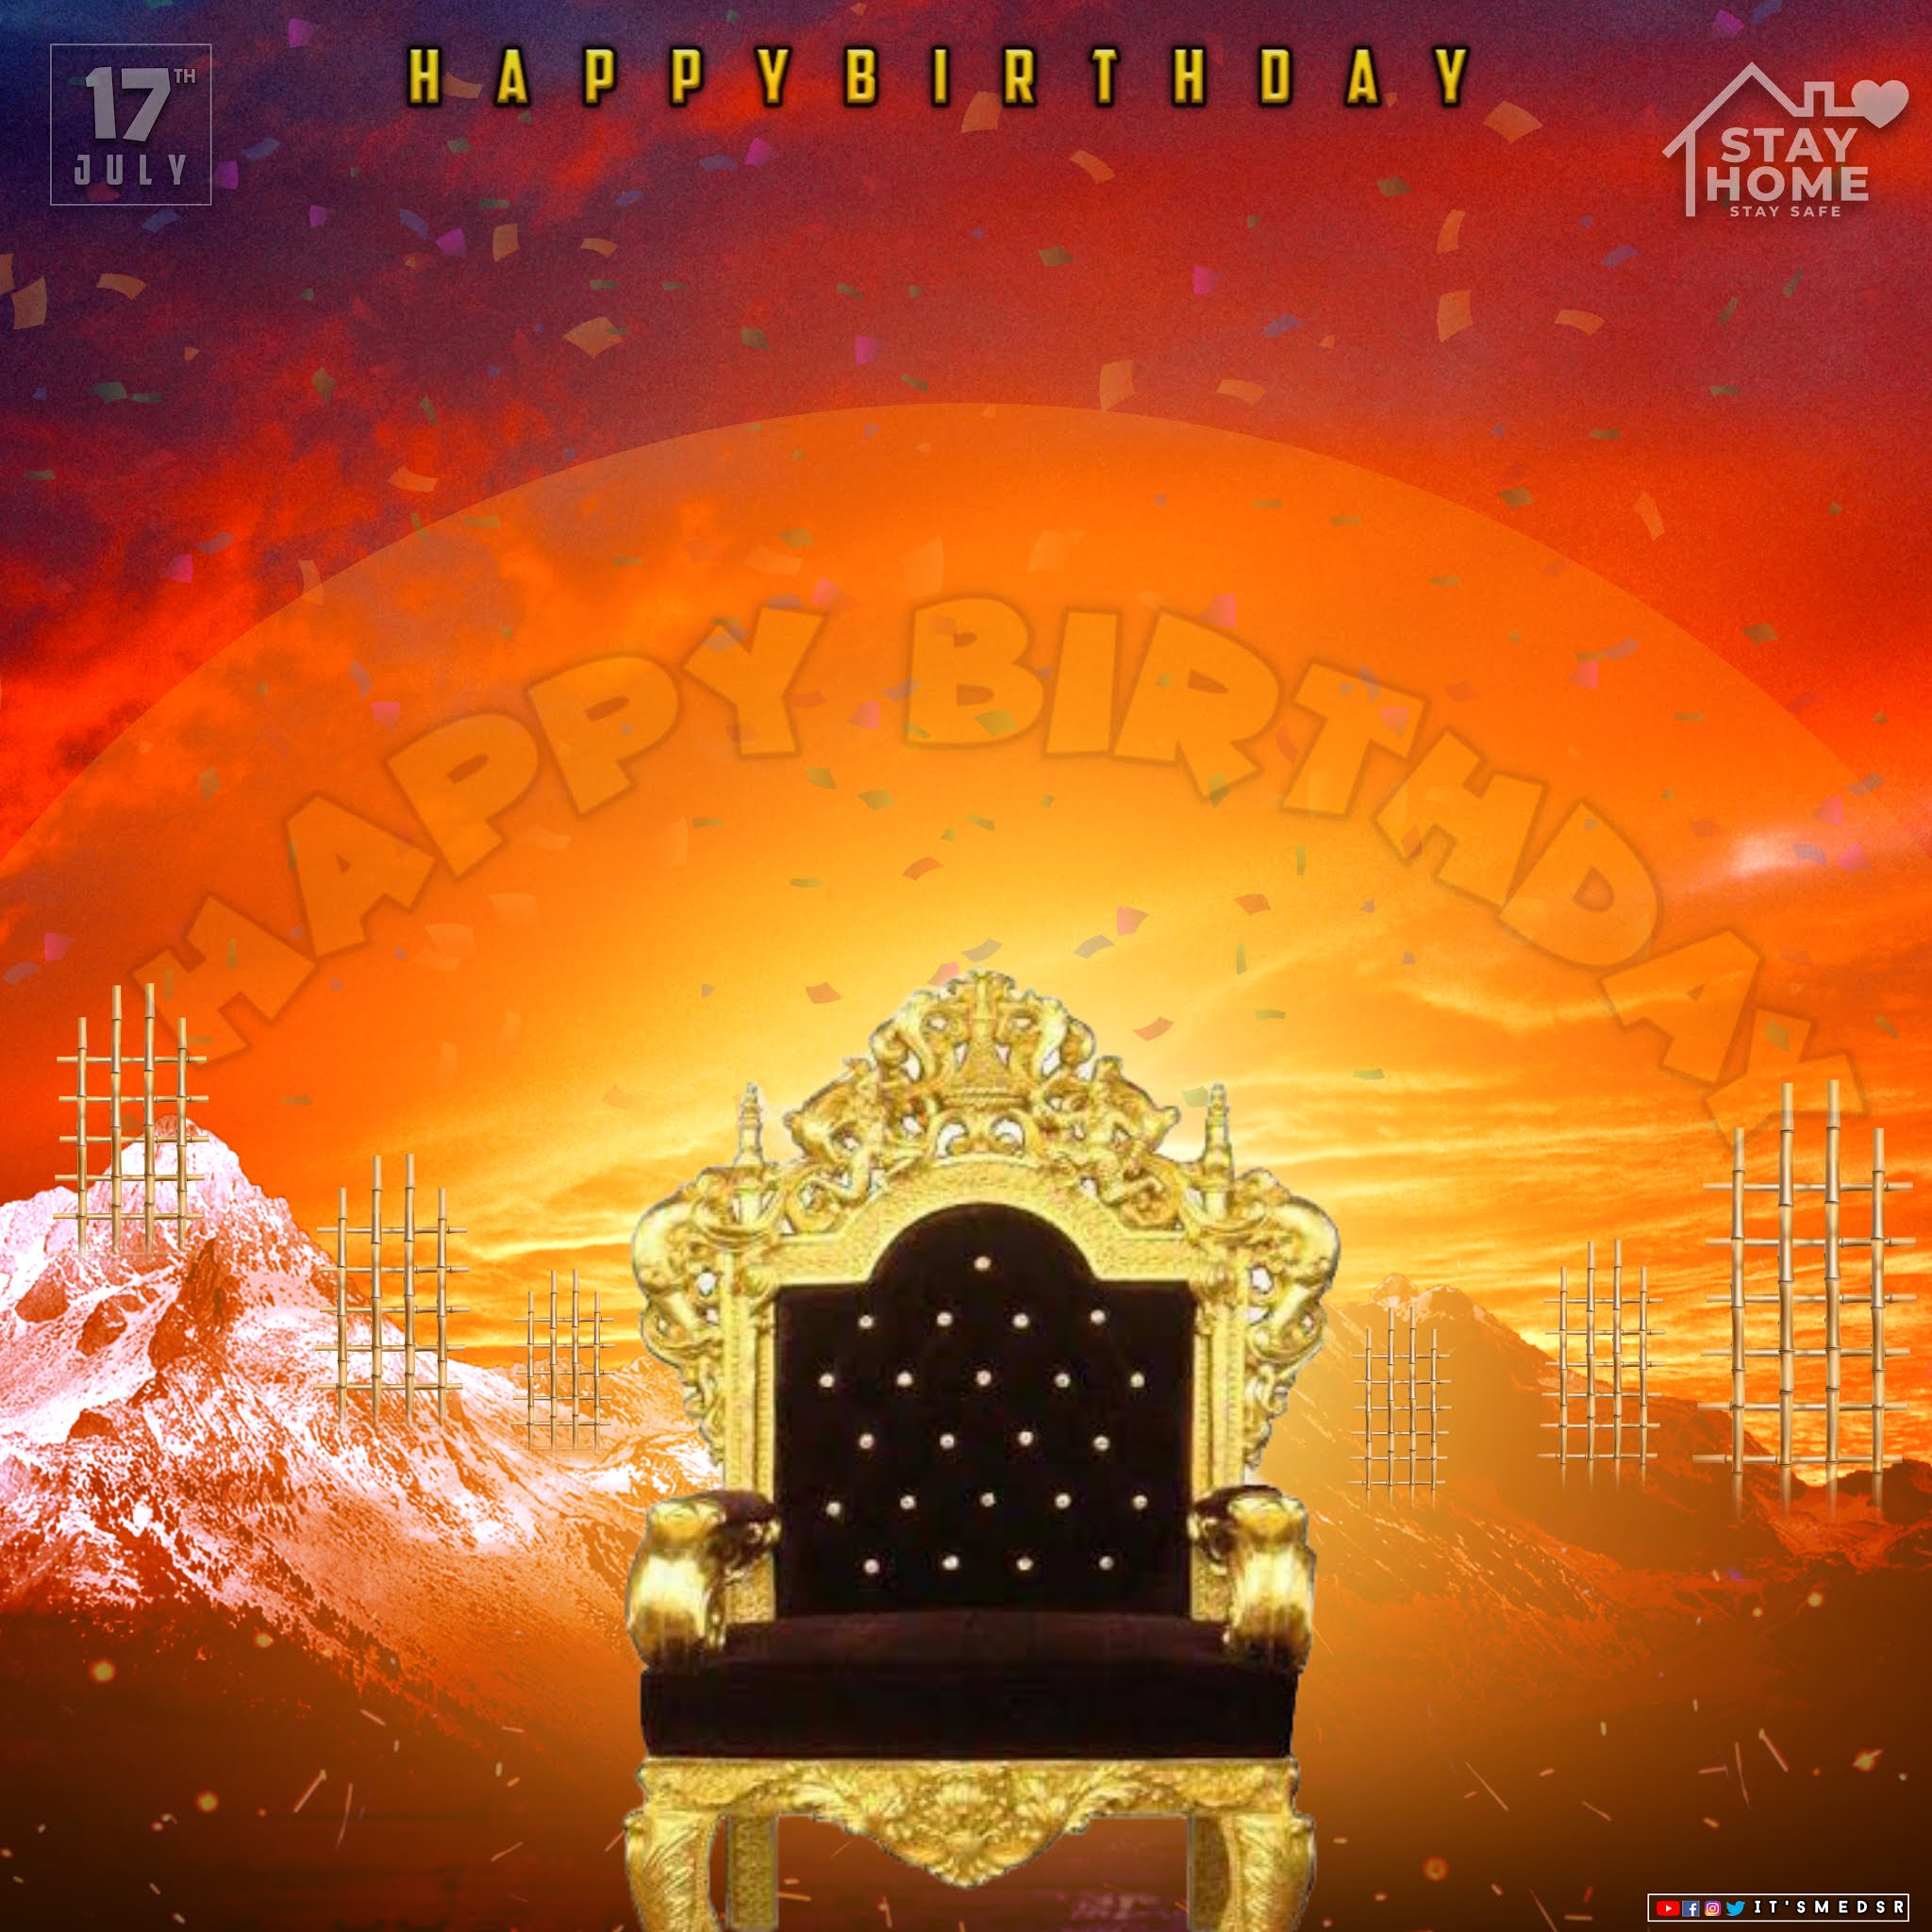 NEW CDP HD BACKGROUNDS || Free Birthday Banner Backgrounds || Free Birthday  Editing Backgrounds || Download free CDP backgrounds